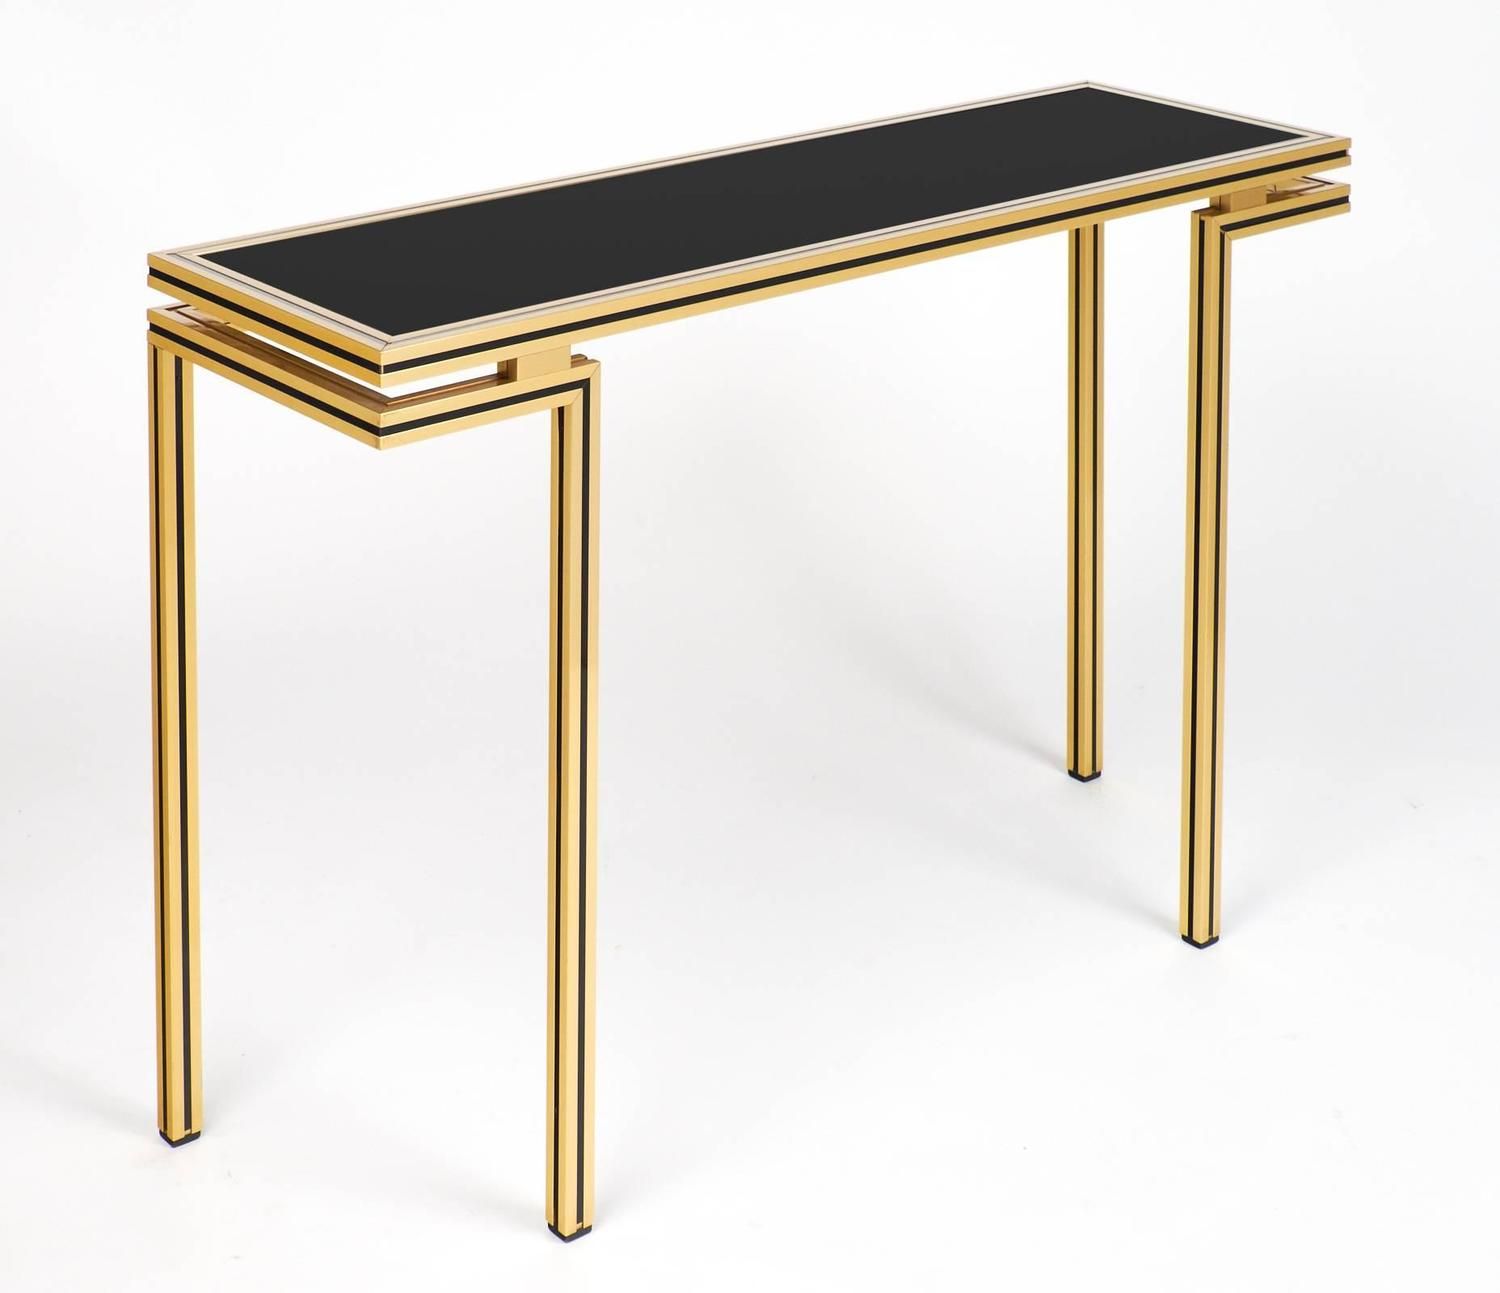 Vintage Black Glass Top Brass Console Tablepierre With Hammered Antique Brass Modern Console Tables (View 3 of 20)